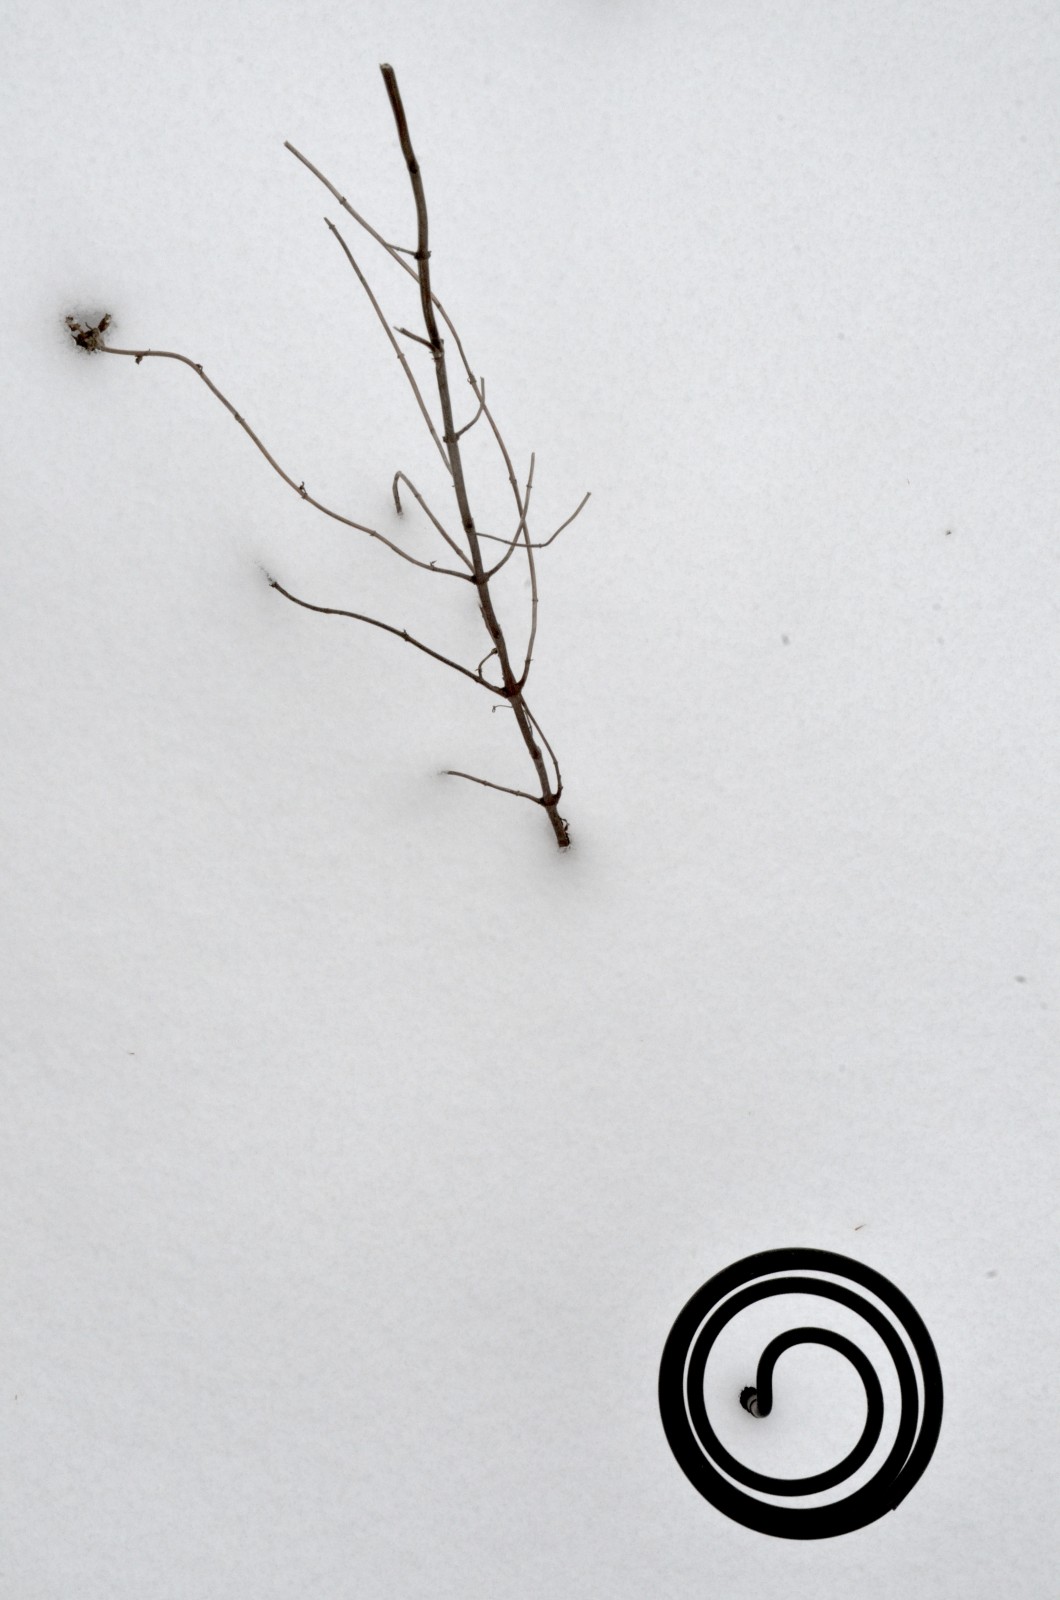 Iron decoration with twigs protruding from snowfall